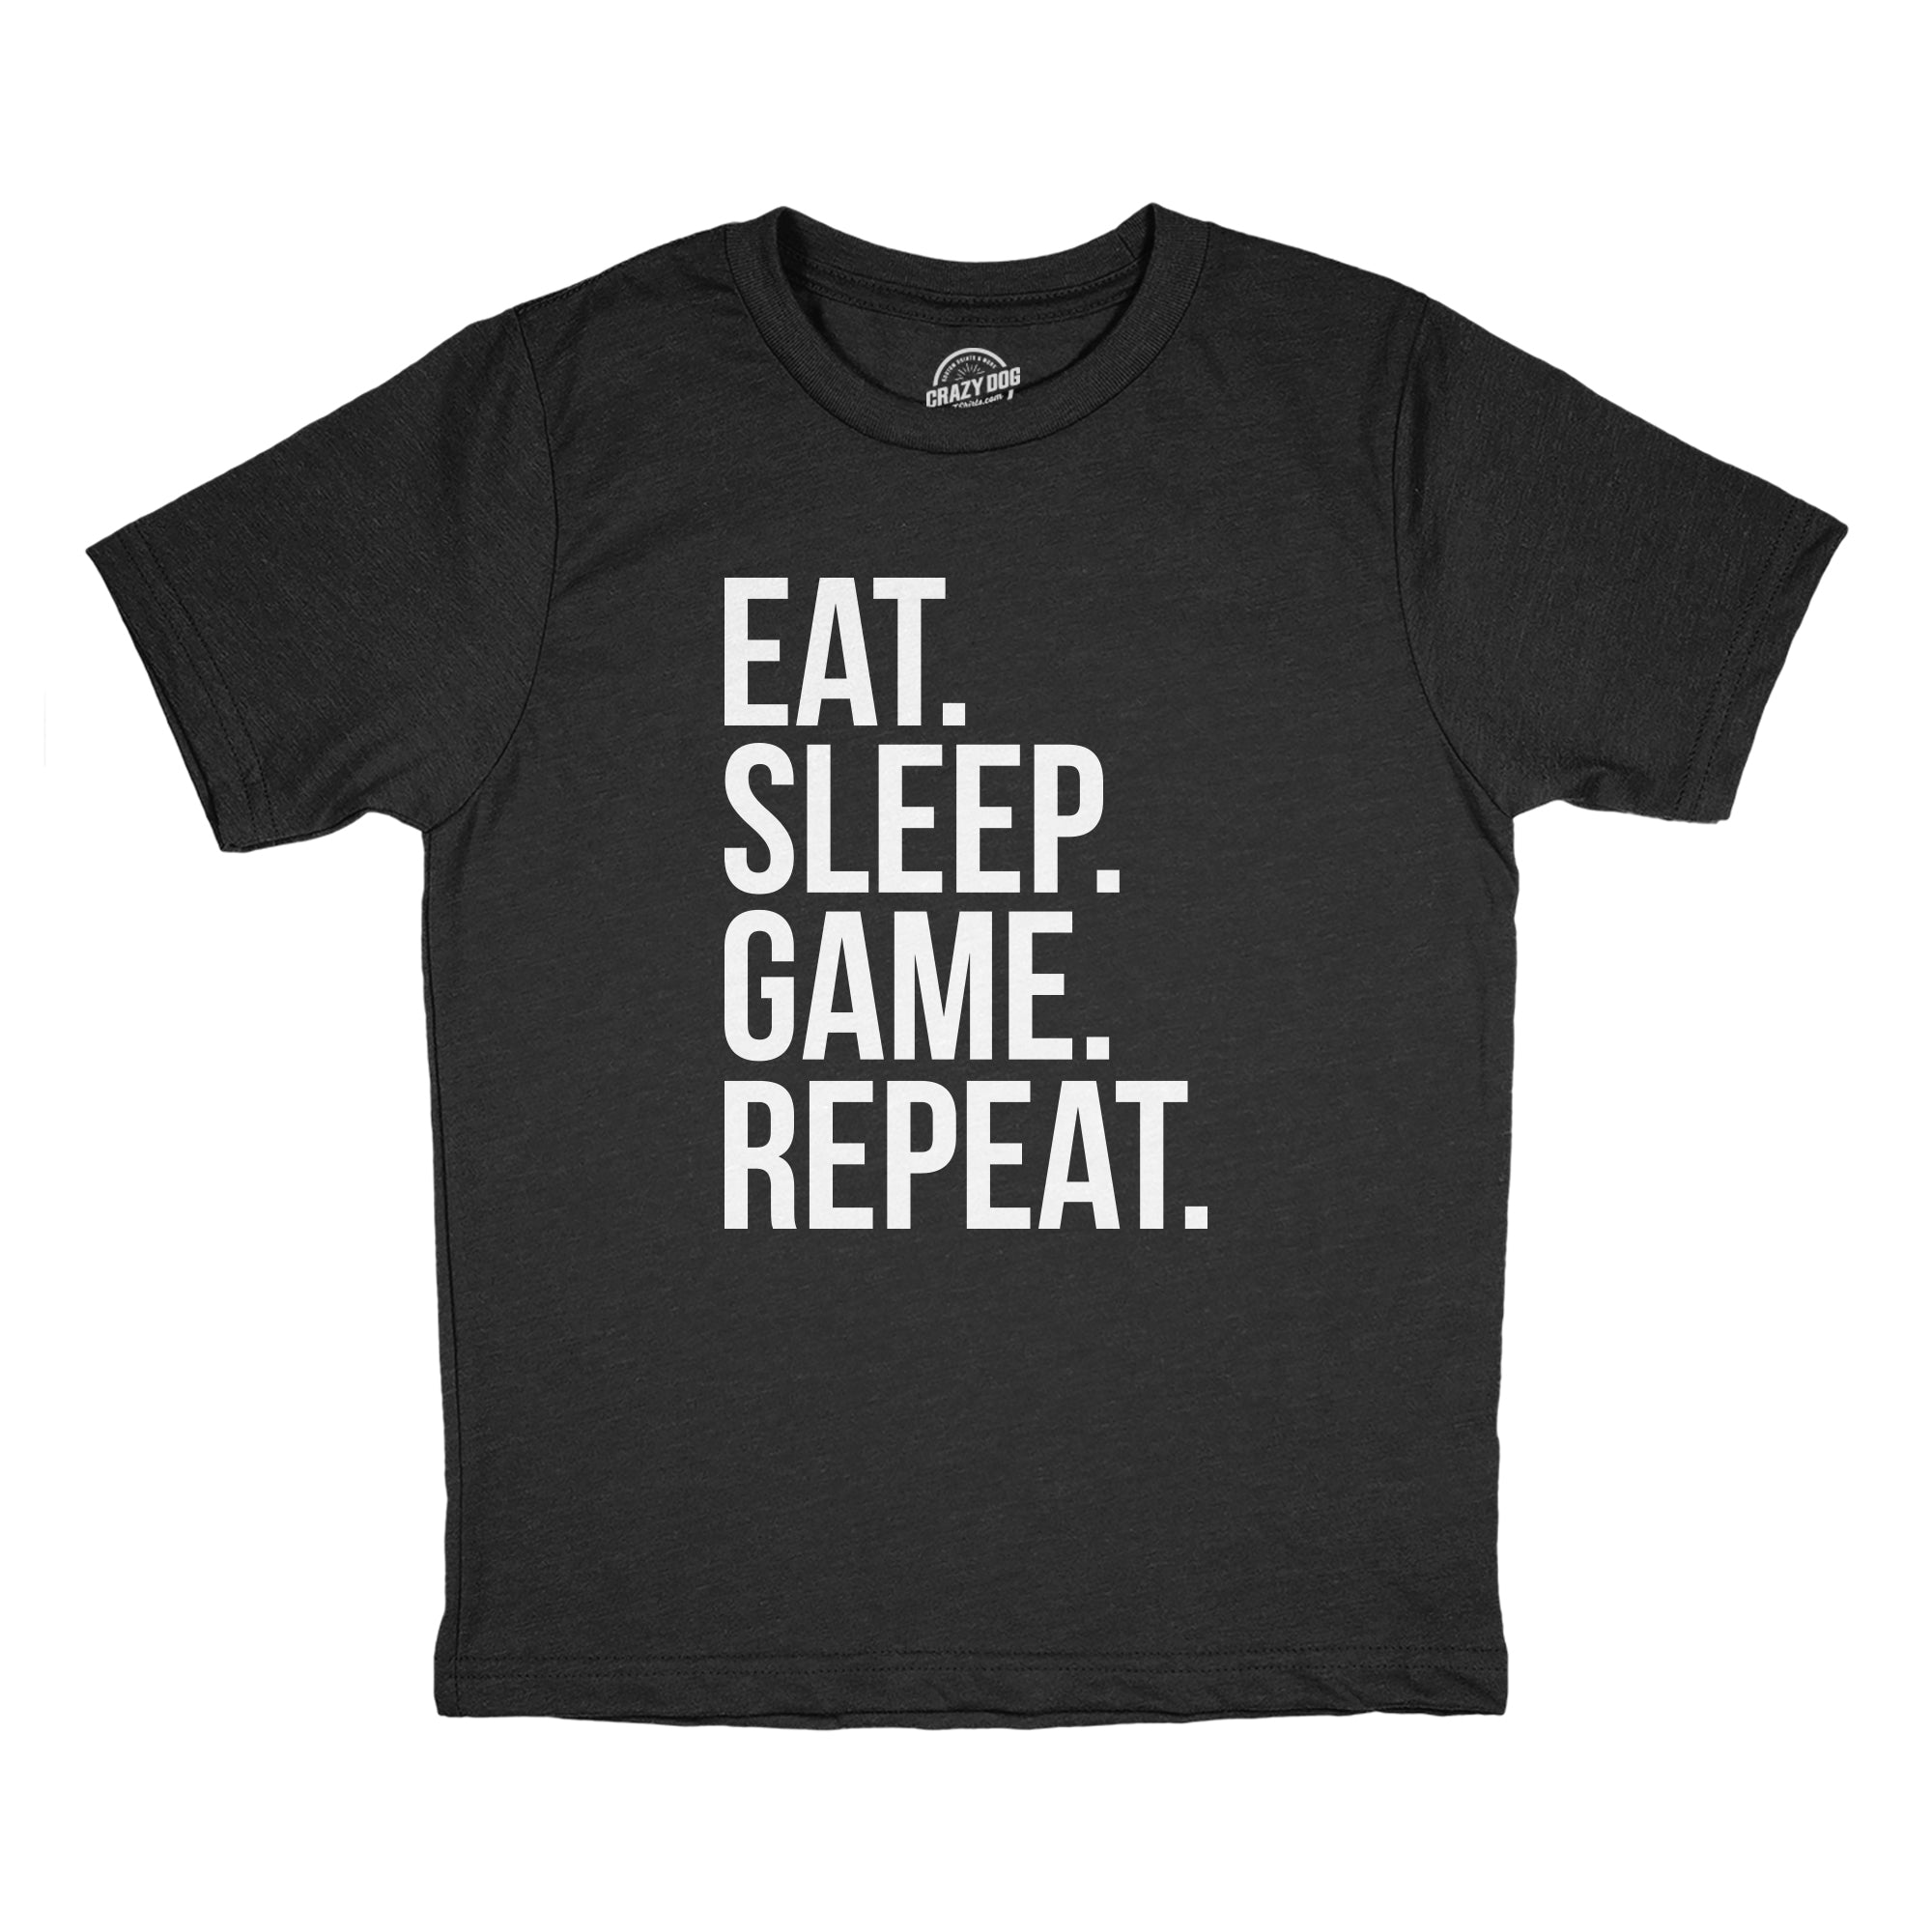 Funny Heather Black - GAME Eat Sleep Game Repeat Youth T Shirt Nerdy Nerdy Video Games Tee